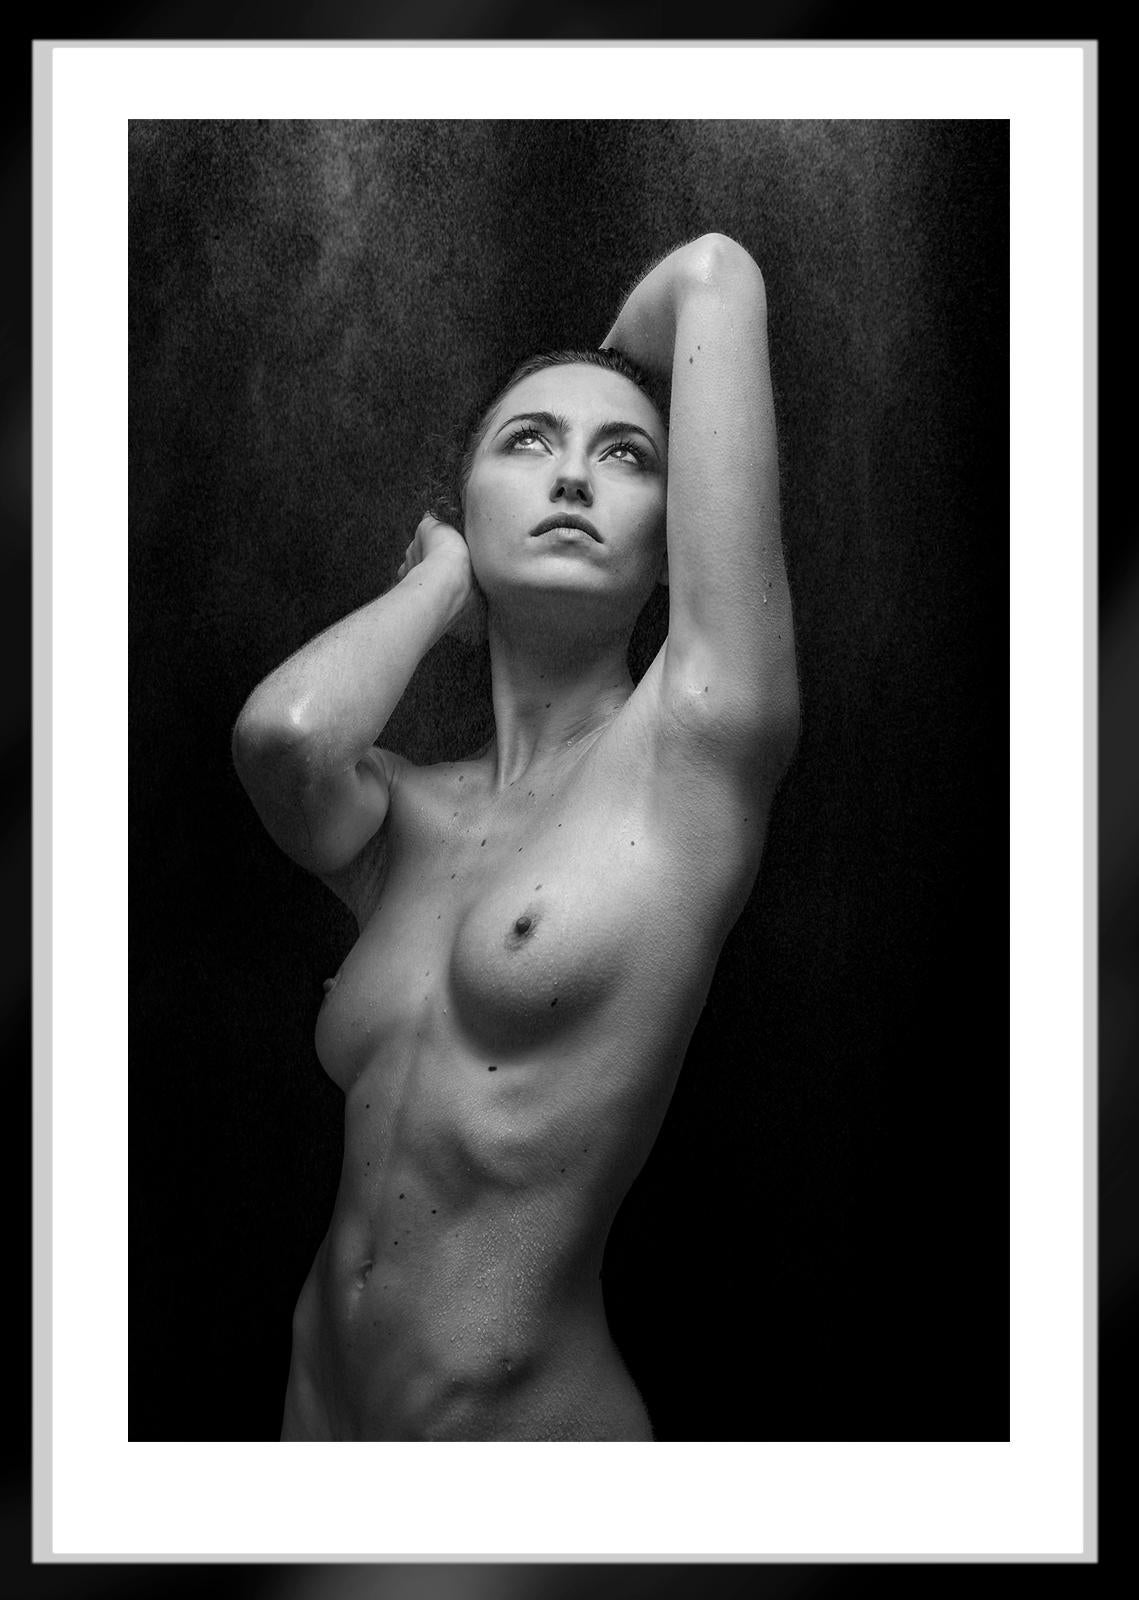 Mist - Signed limited edition nude art print, Black White Photo, Sensual model - Contemporary Photograph by Ian Sanderson